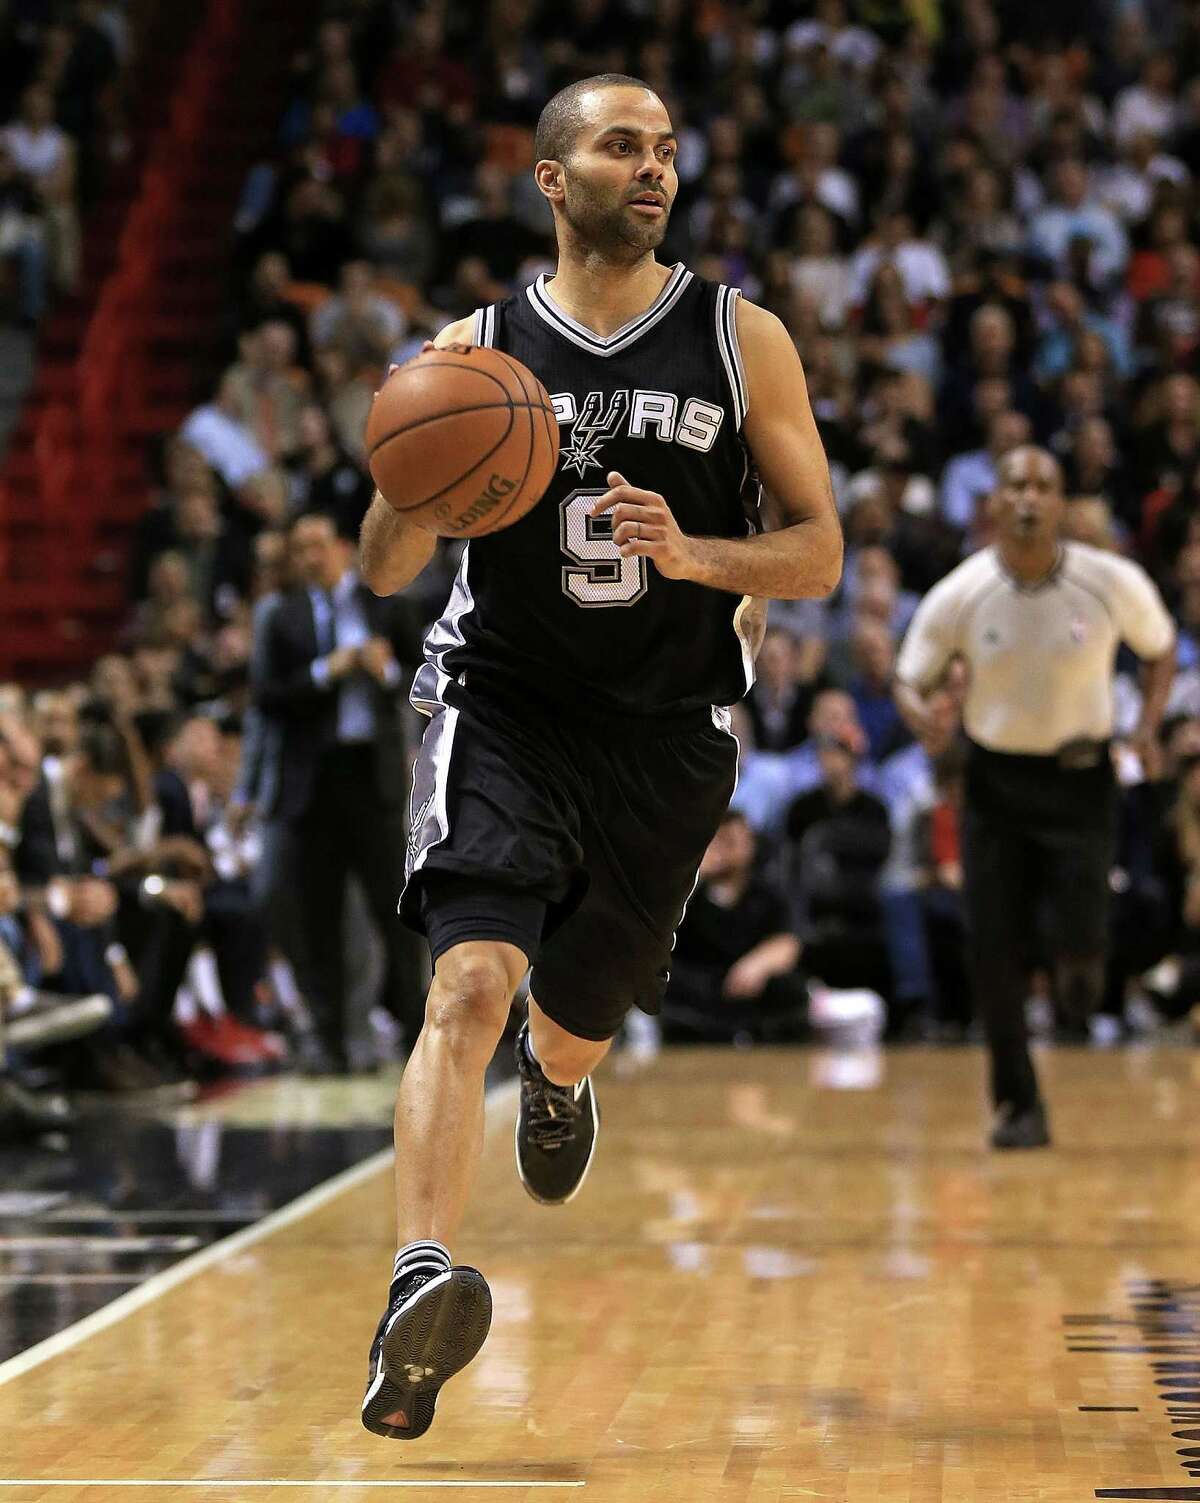 MIAMI, FL - FEBRUARY 09: Tony Parker #9 of the San Antonio Spurs drives during a game against the Miami Heat at American Airlines Arena on February 9, 2016 in Miami, Florida. NOTE TO USER: User expressly acknowledges and agrees that, by downloading and/or using this photograph, user is consenting to the terms and conditions of the Getty Images License Agreement. Mandatory copyright notice: